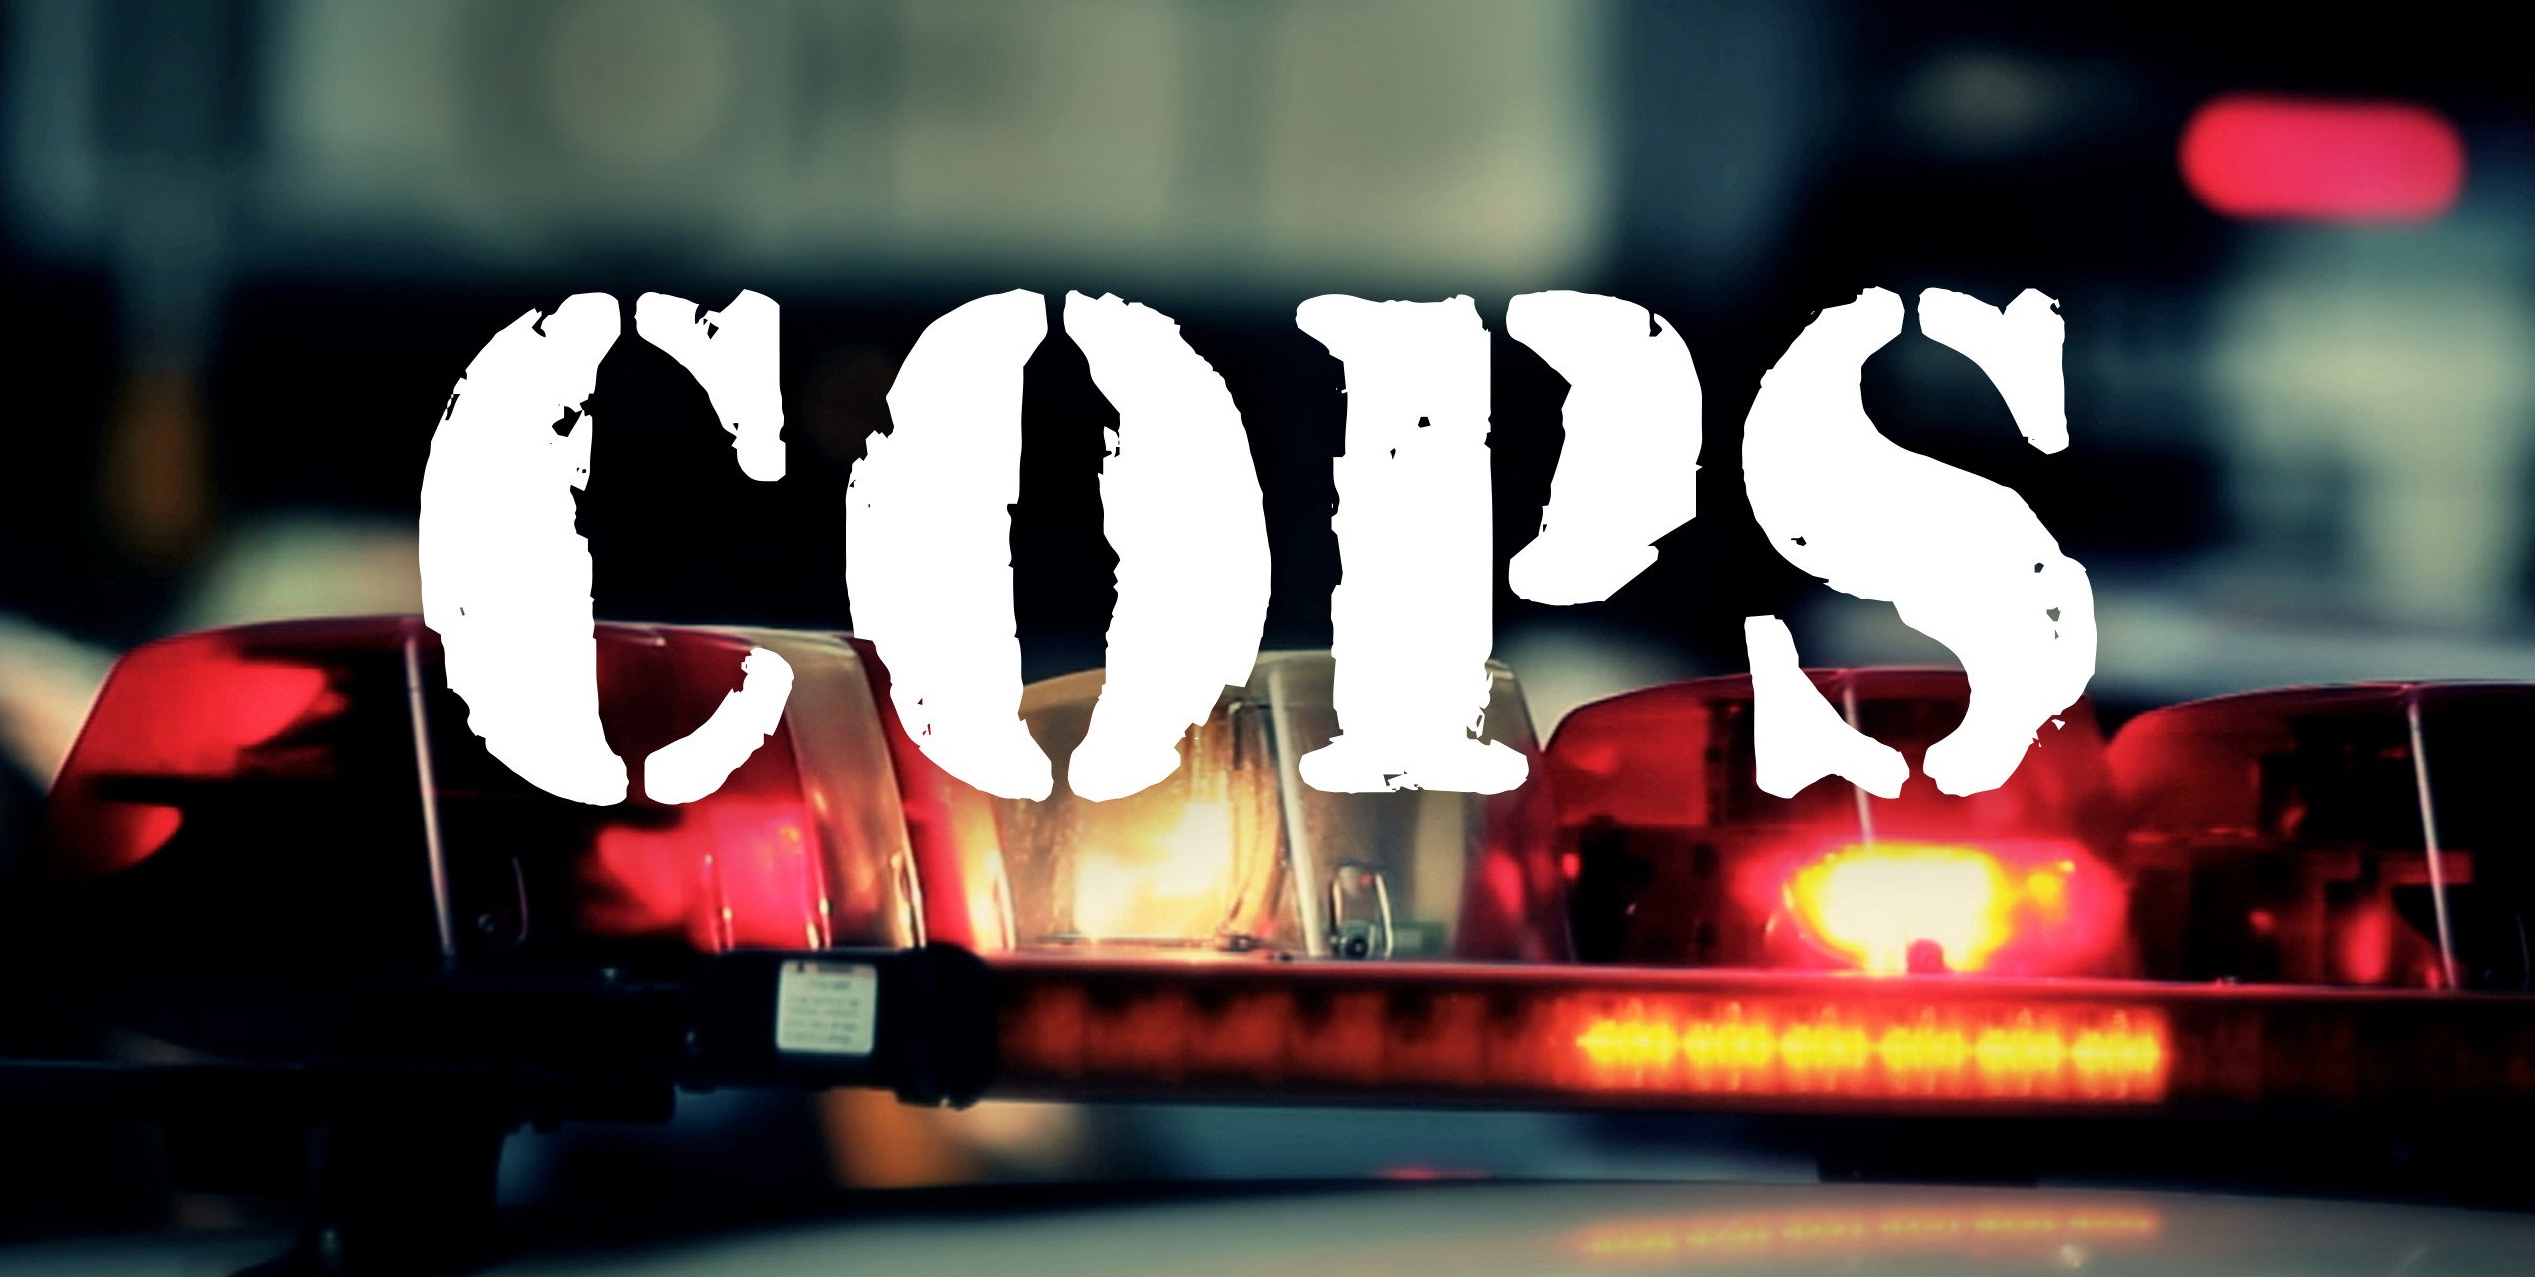 33rd season of american reality show COPS cancelled over protests against police brutality